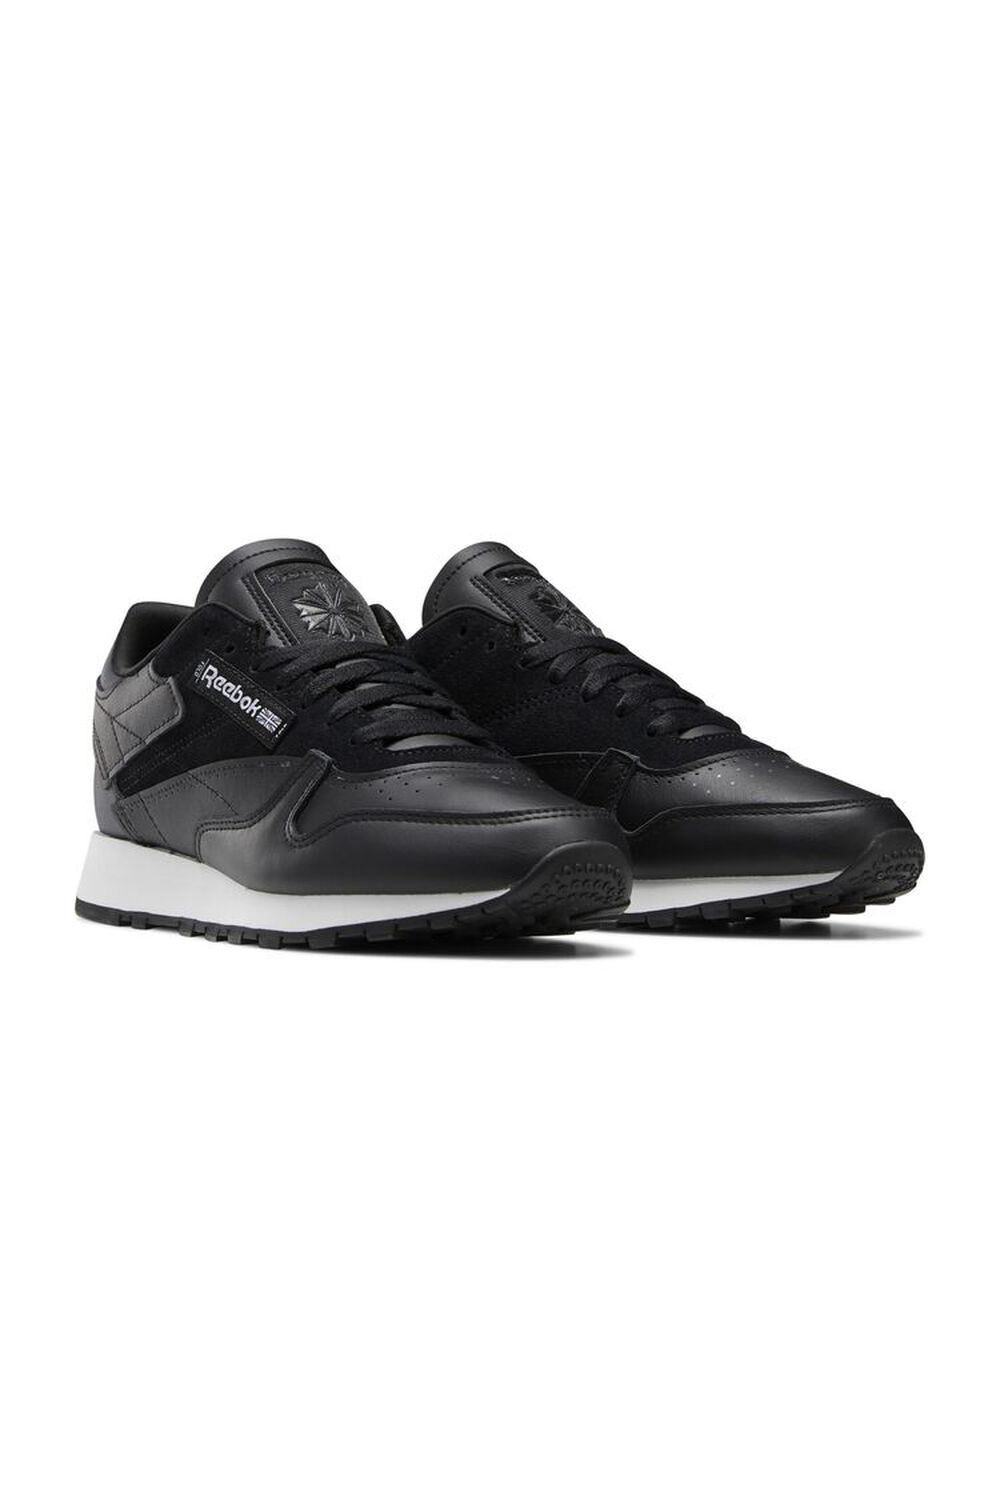 Reebok Classic Make It Yours Shoes